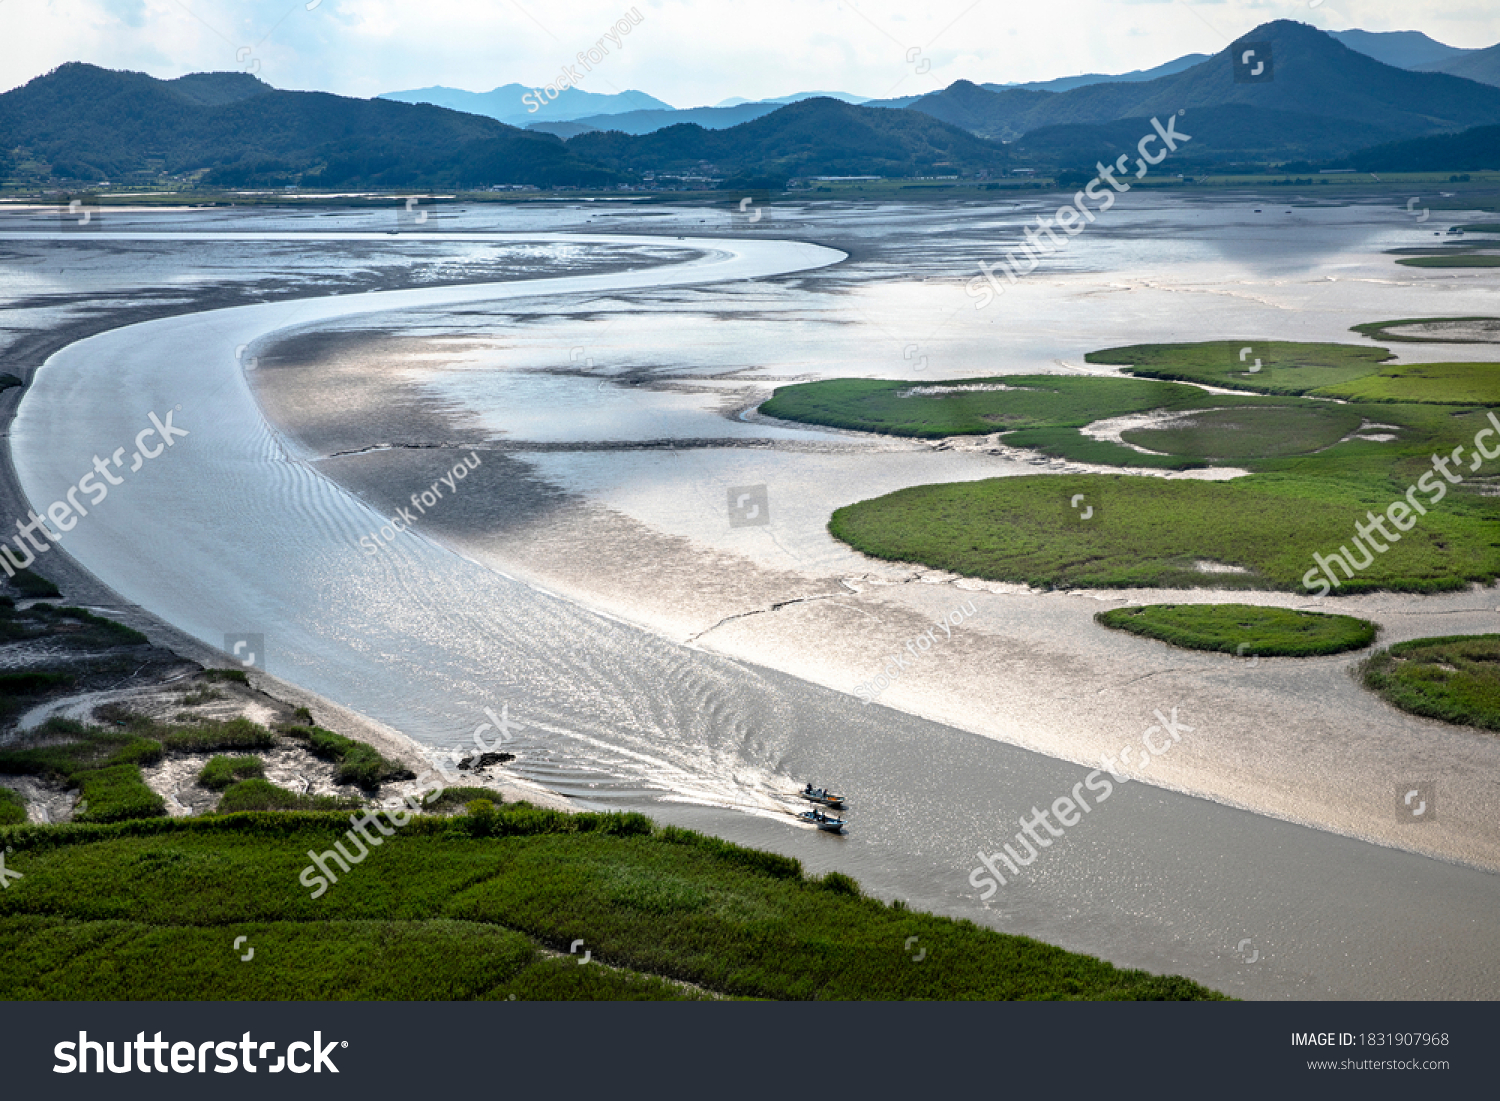 Aerial view of two fishing boats on the sea with mud flat at Suncheonman Bay of Waon Beach near Suncheon-si, South Korea
 #1831907968